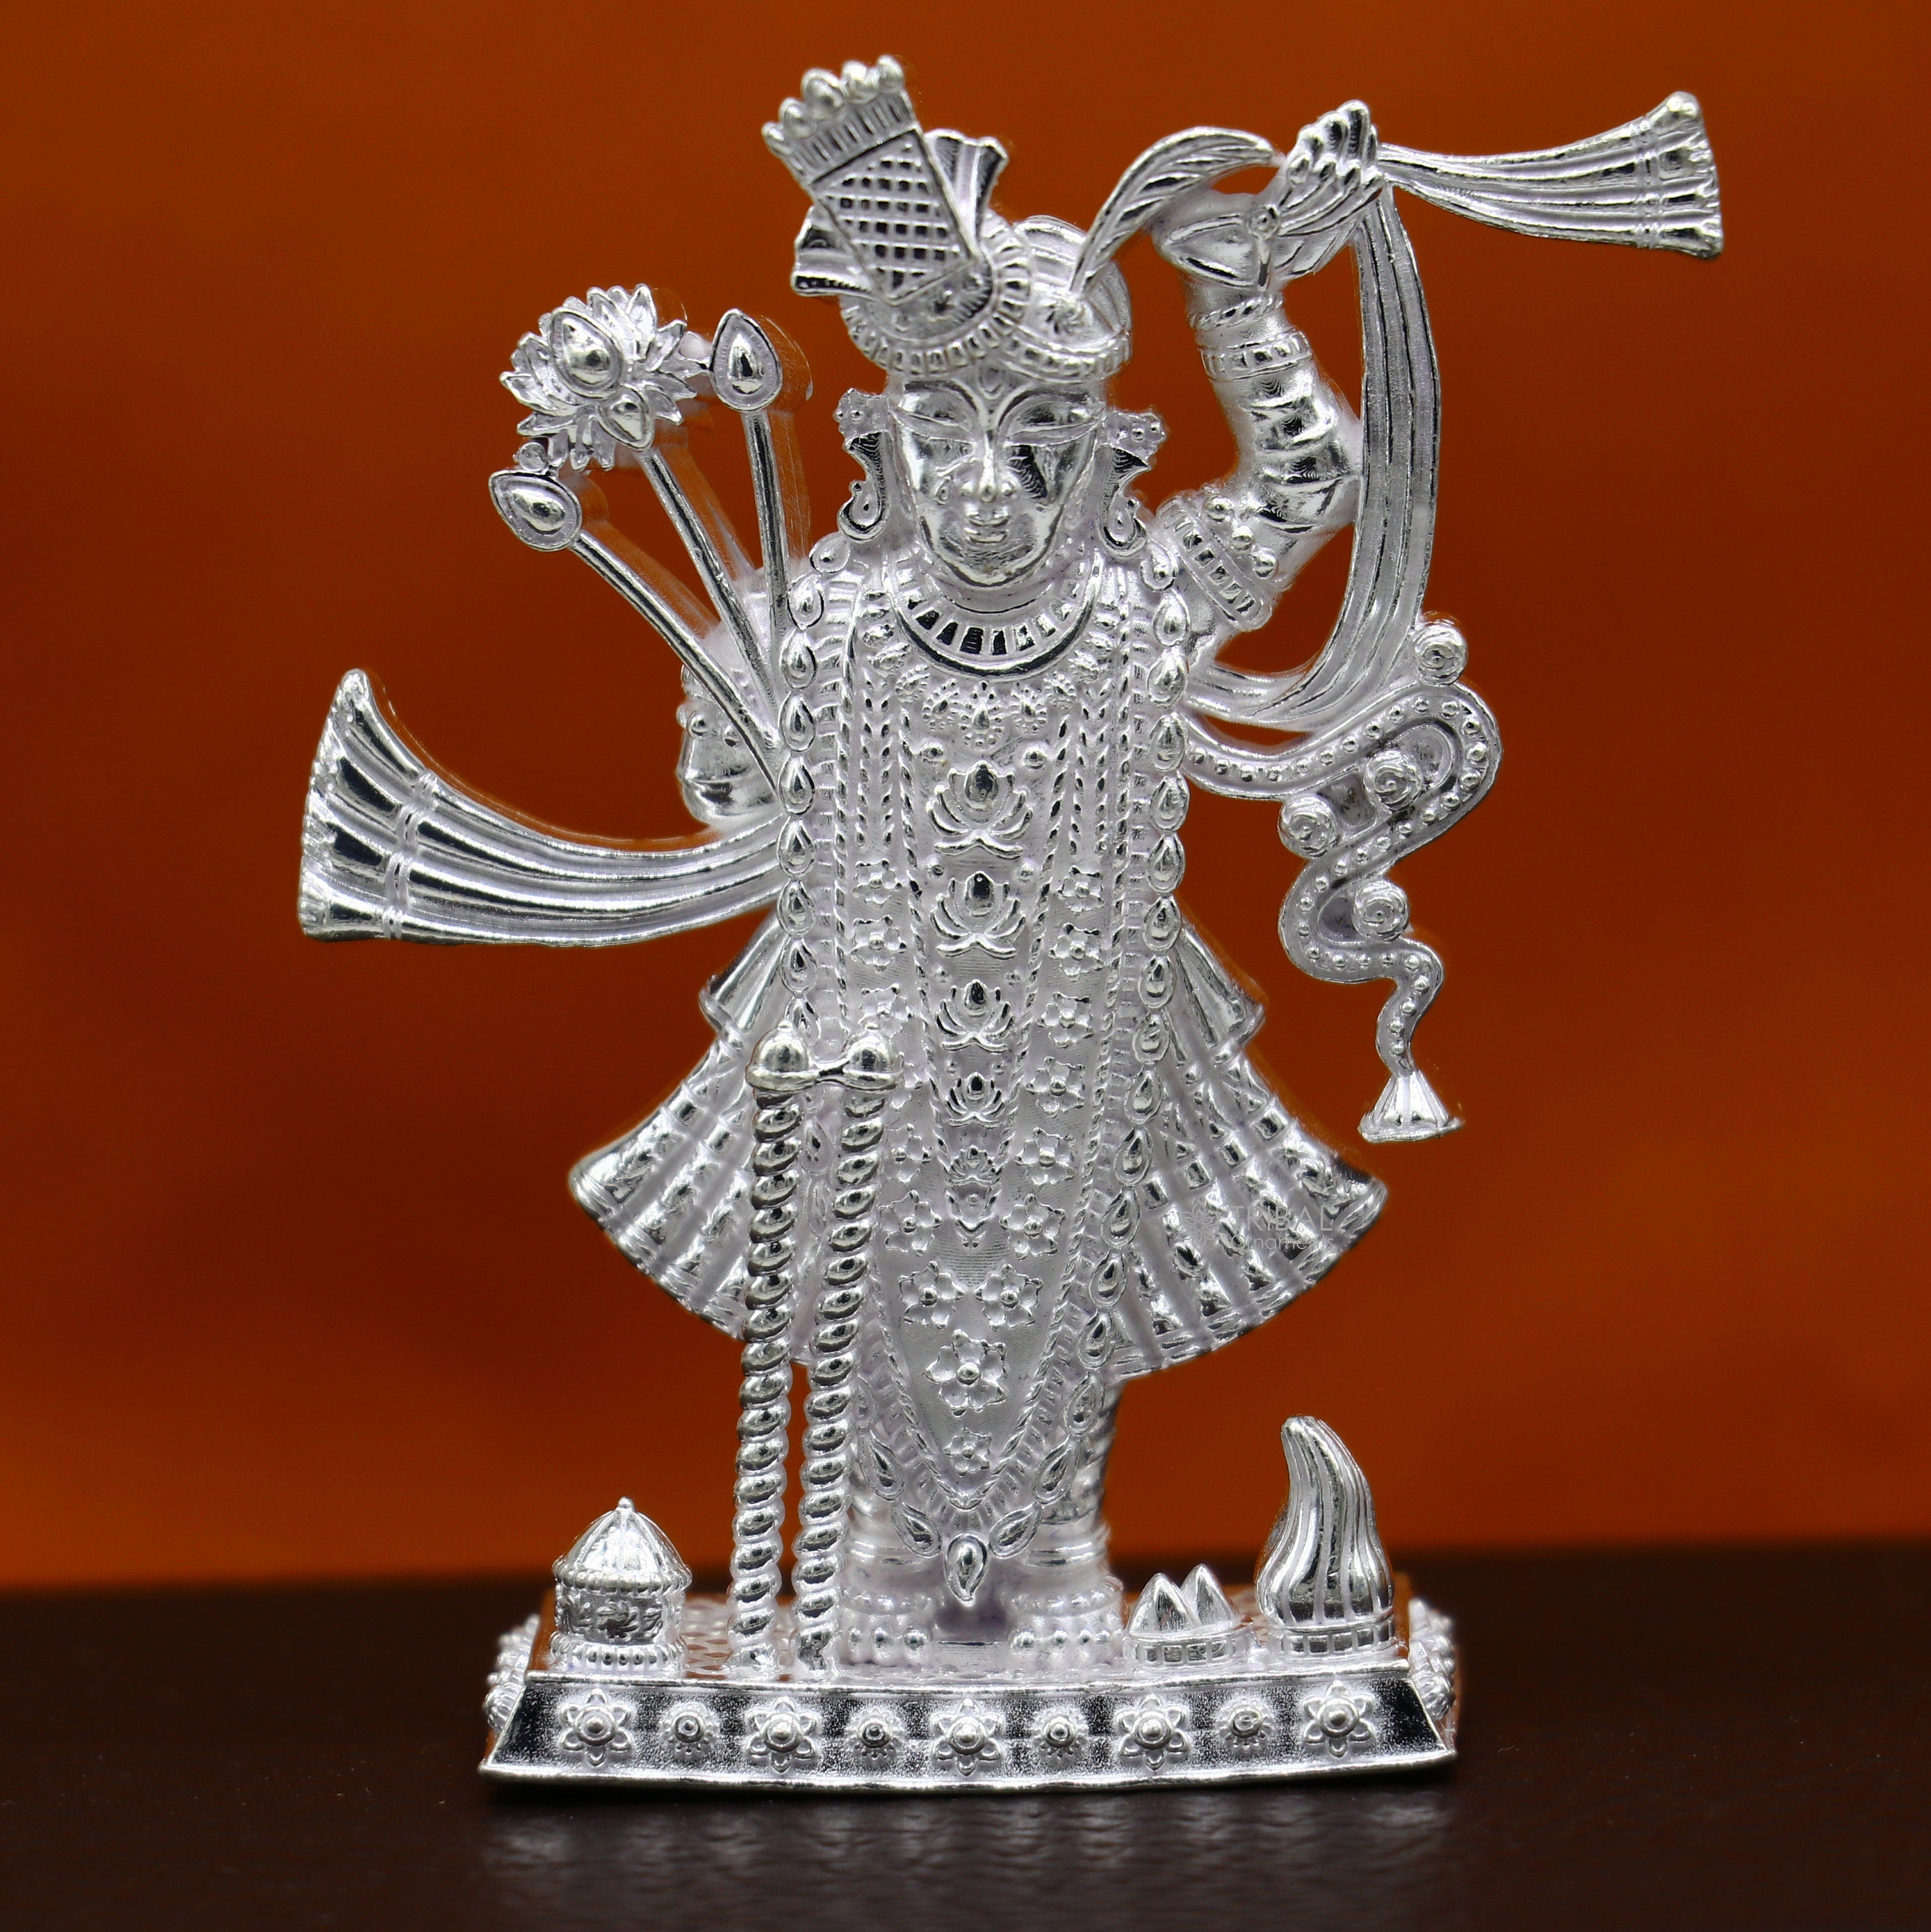 Buy Idolkart Pure Gold Coated Antique Goddess Lakshmi Idol for Pooja -  Lakshmi Devi Idol for Pooja, Genuine 'Laxmi Murti' Ideal for Puja Room,  Home Decor, and Good Luck Gifts Online at